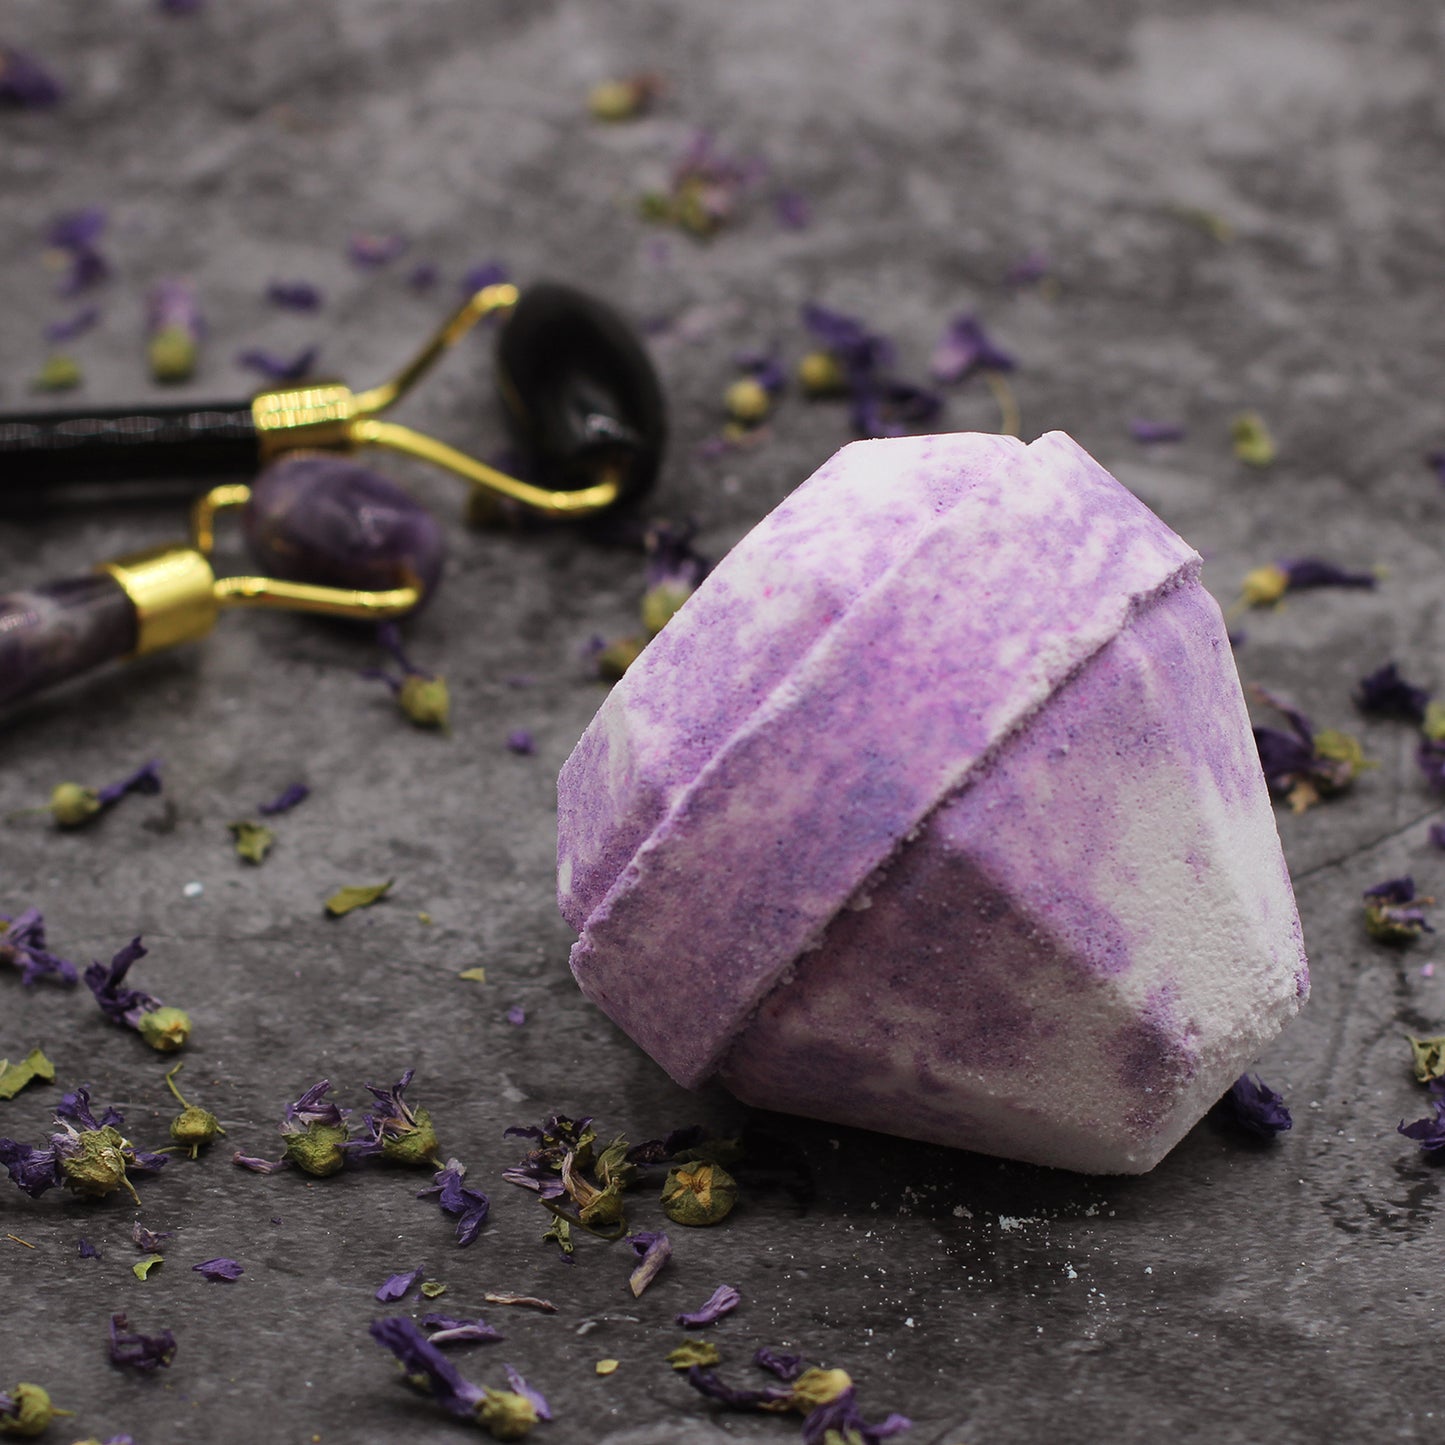 A picture of a luxurious looking purple or lilac diamond shaped bath bomb. The bath bomb is laying on its side on a dark grey background. Sprinkles of dried purple and yellow flower petals in the foreground and between the bath bomb  and two crystal facial rollers, adding to the sense of luxury.